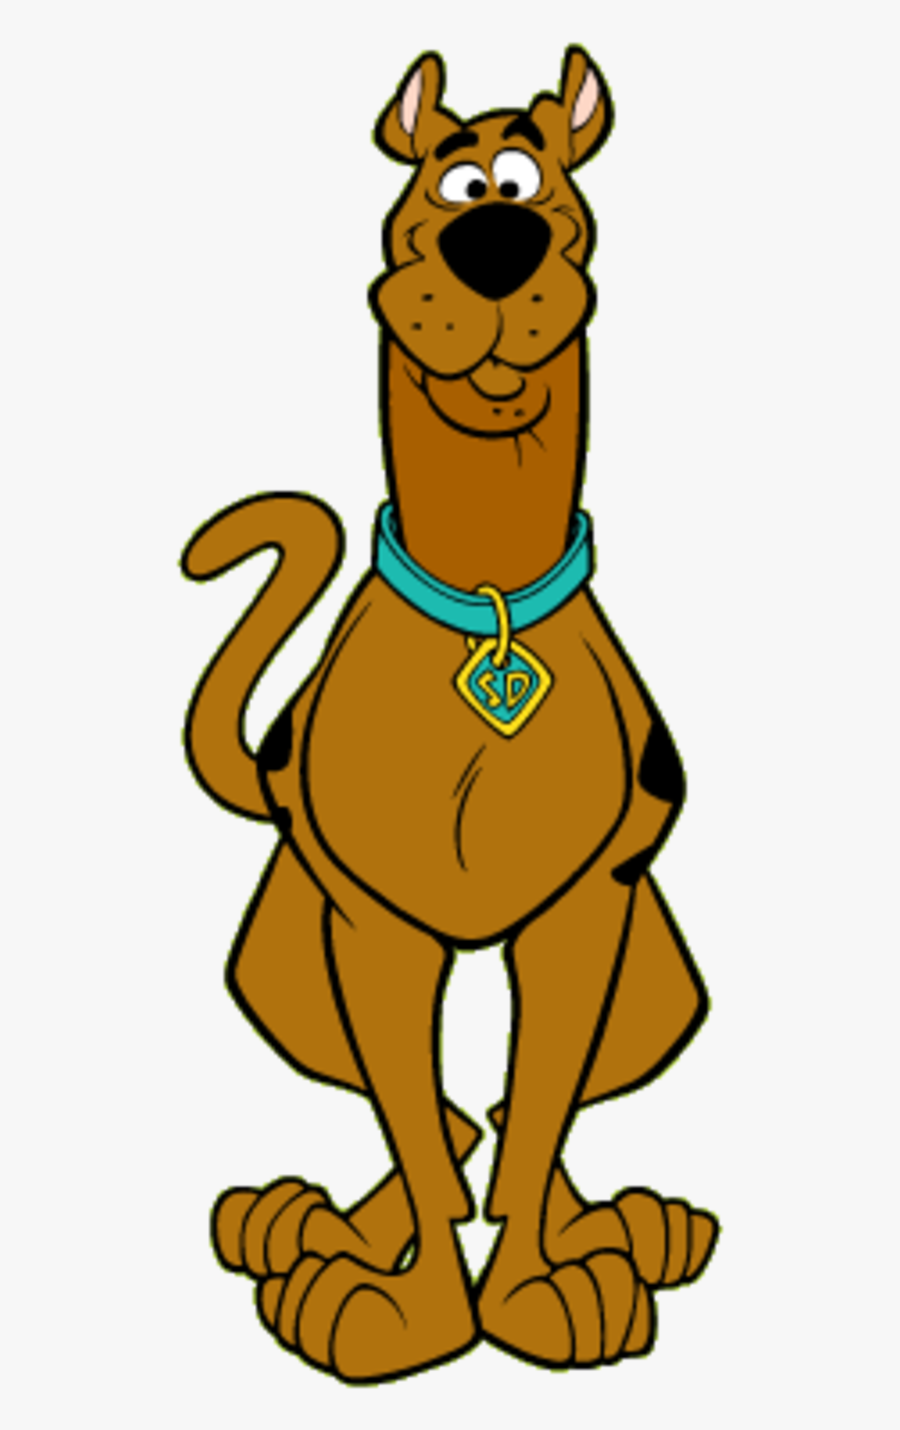 Lizard Clipart Forked Tongue - Scooby Doo, Transparent Clipart